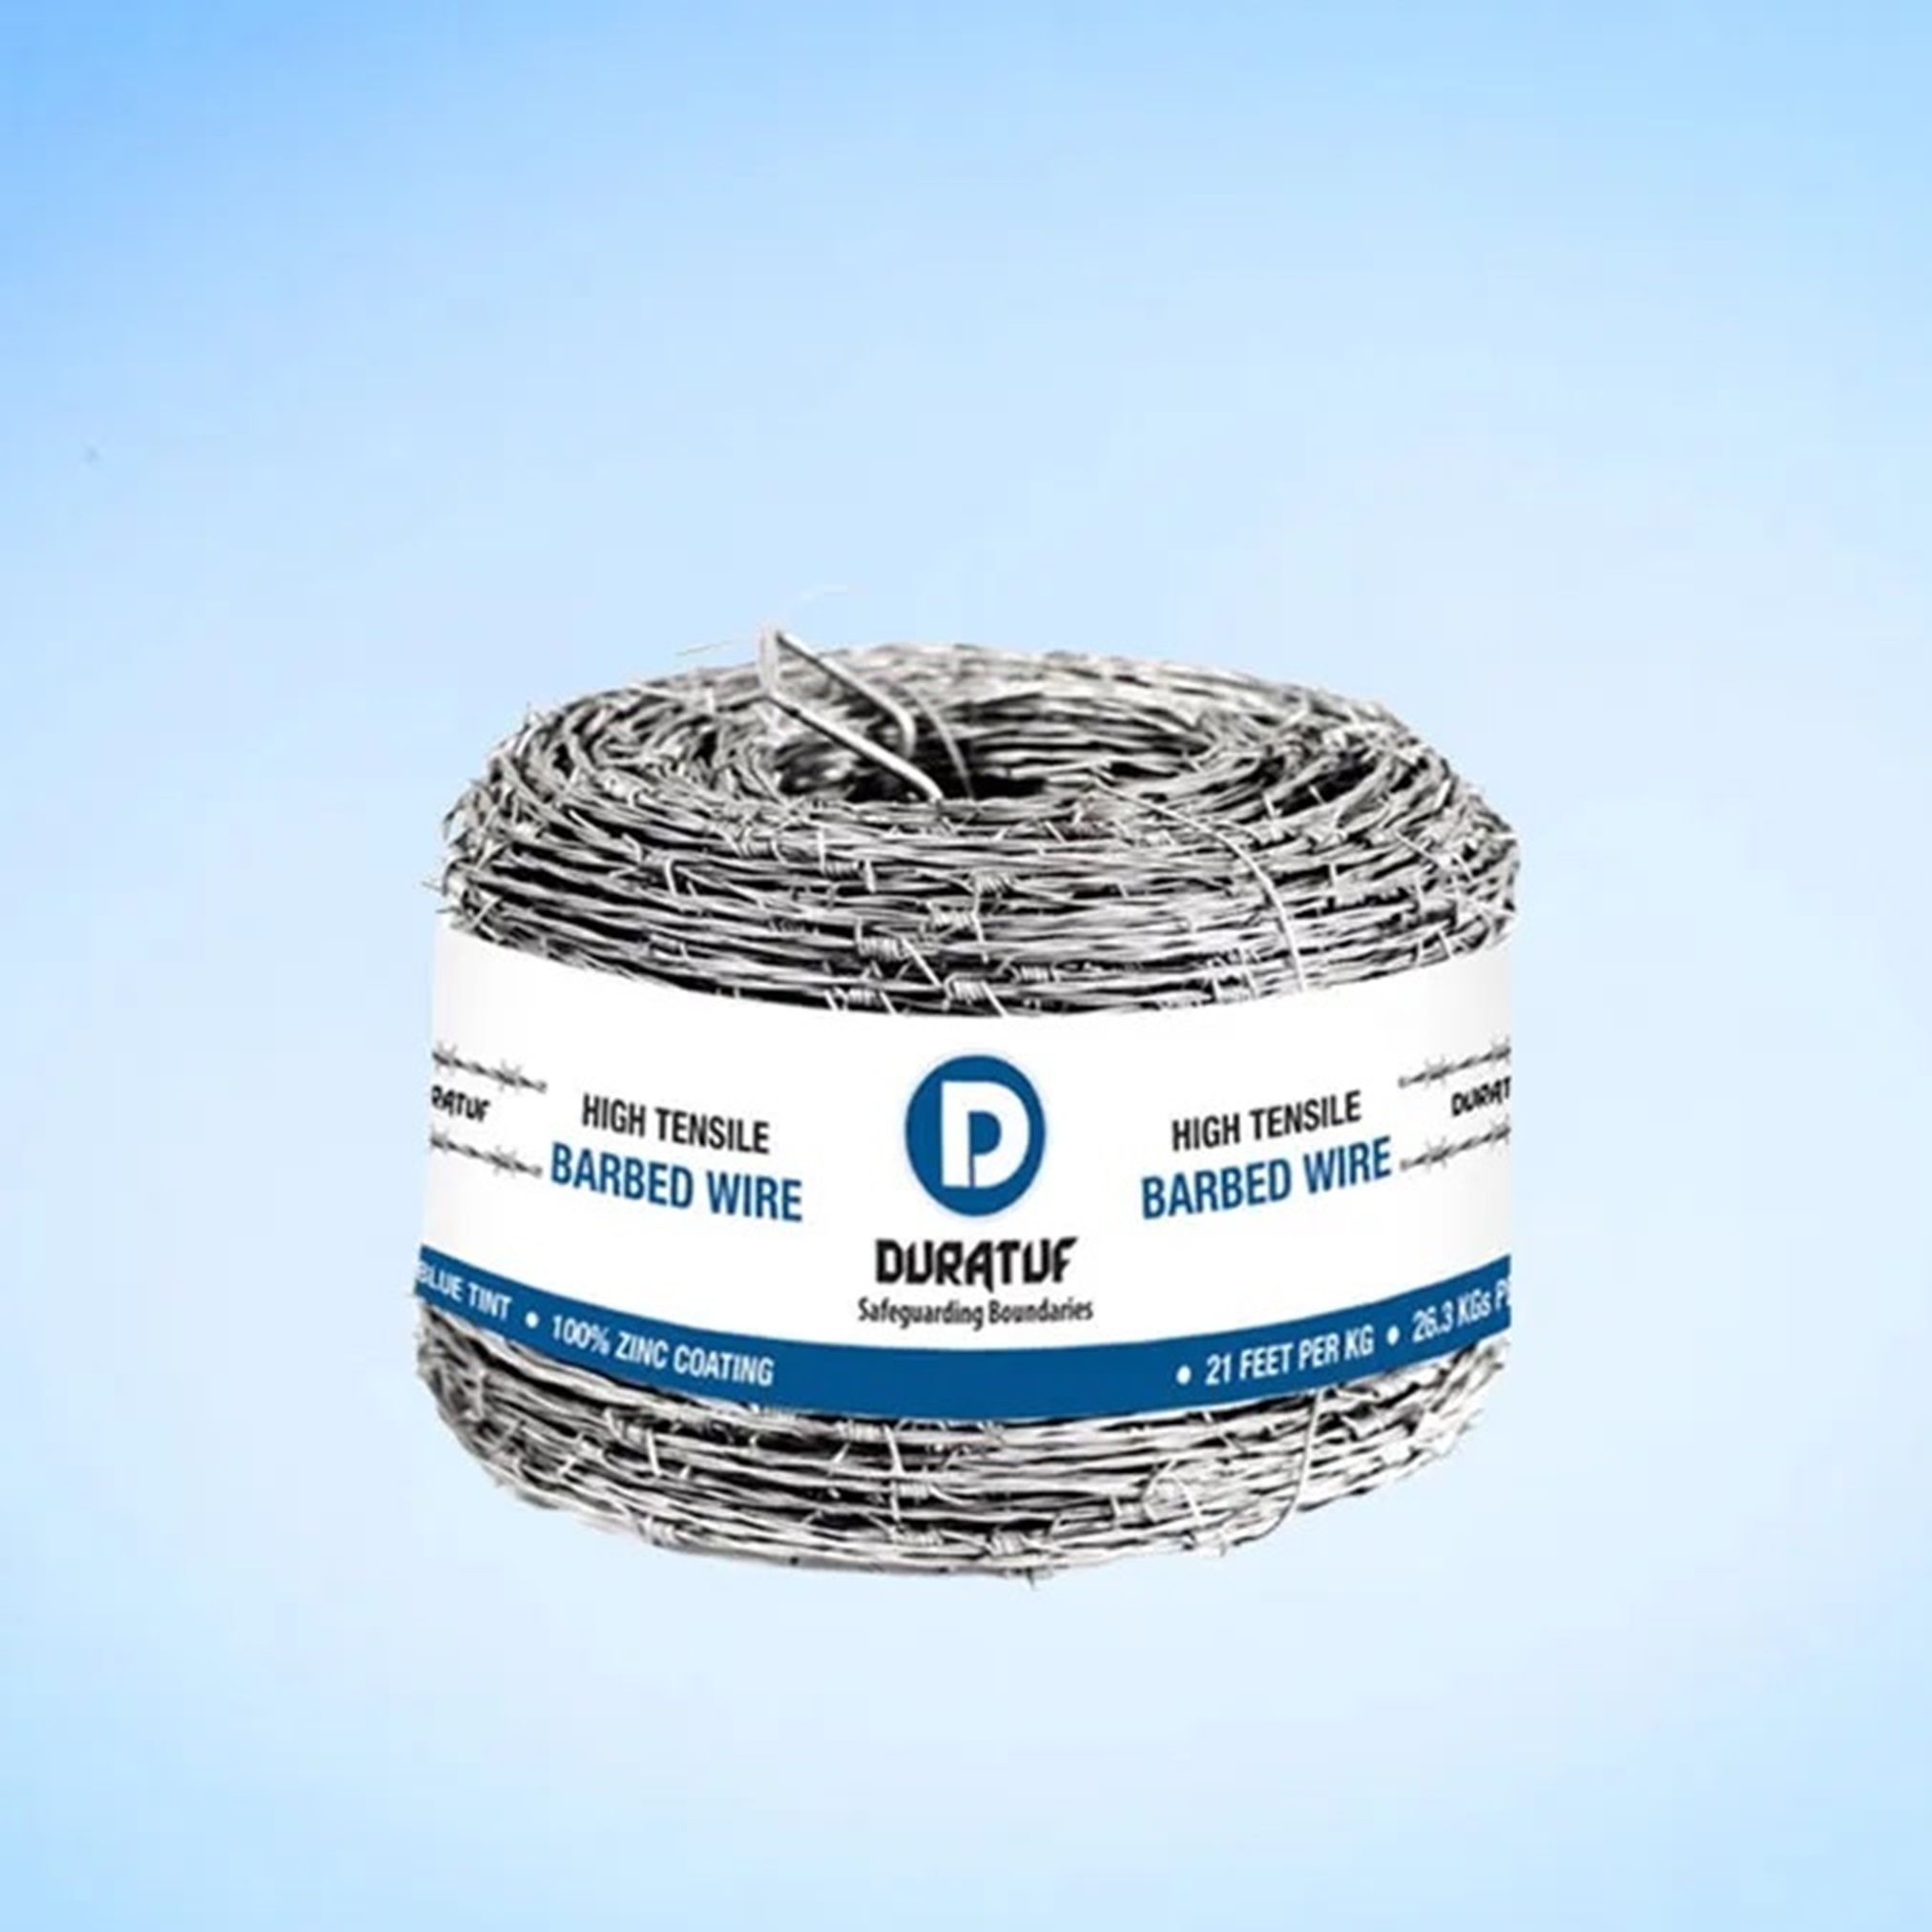 GI Barbed Wire Manufacturers in IndiaServicesBusiness OffersAll Indiaother